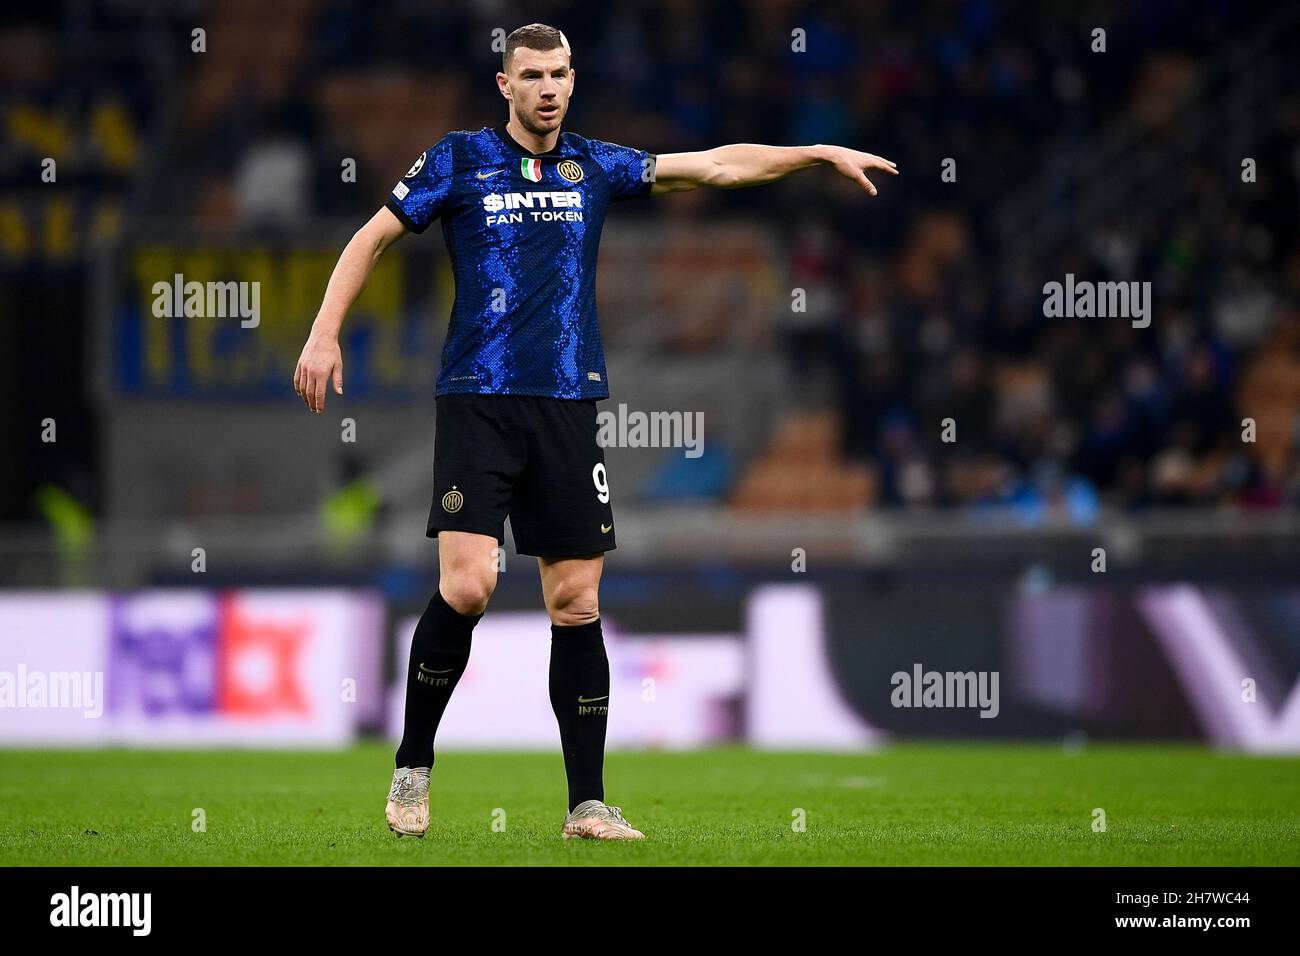 Milan, Italy. 24 November 2021. Edin Dzeko of FC Internazionale gestures during the UEFA Champions League football match between FC Internazionale and FC Shakhtar Donetsk. Credit: Nicolò Campo/Alamy Live News Stock Photo